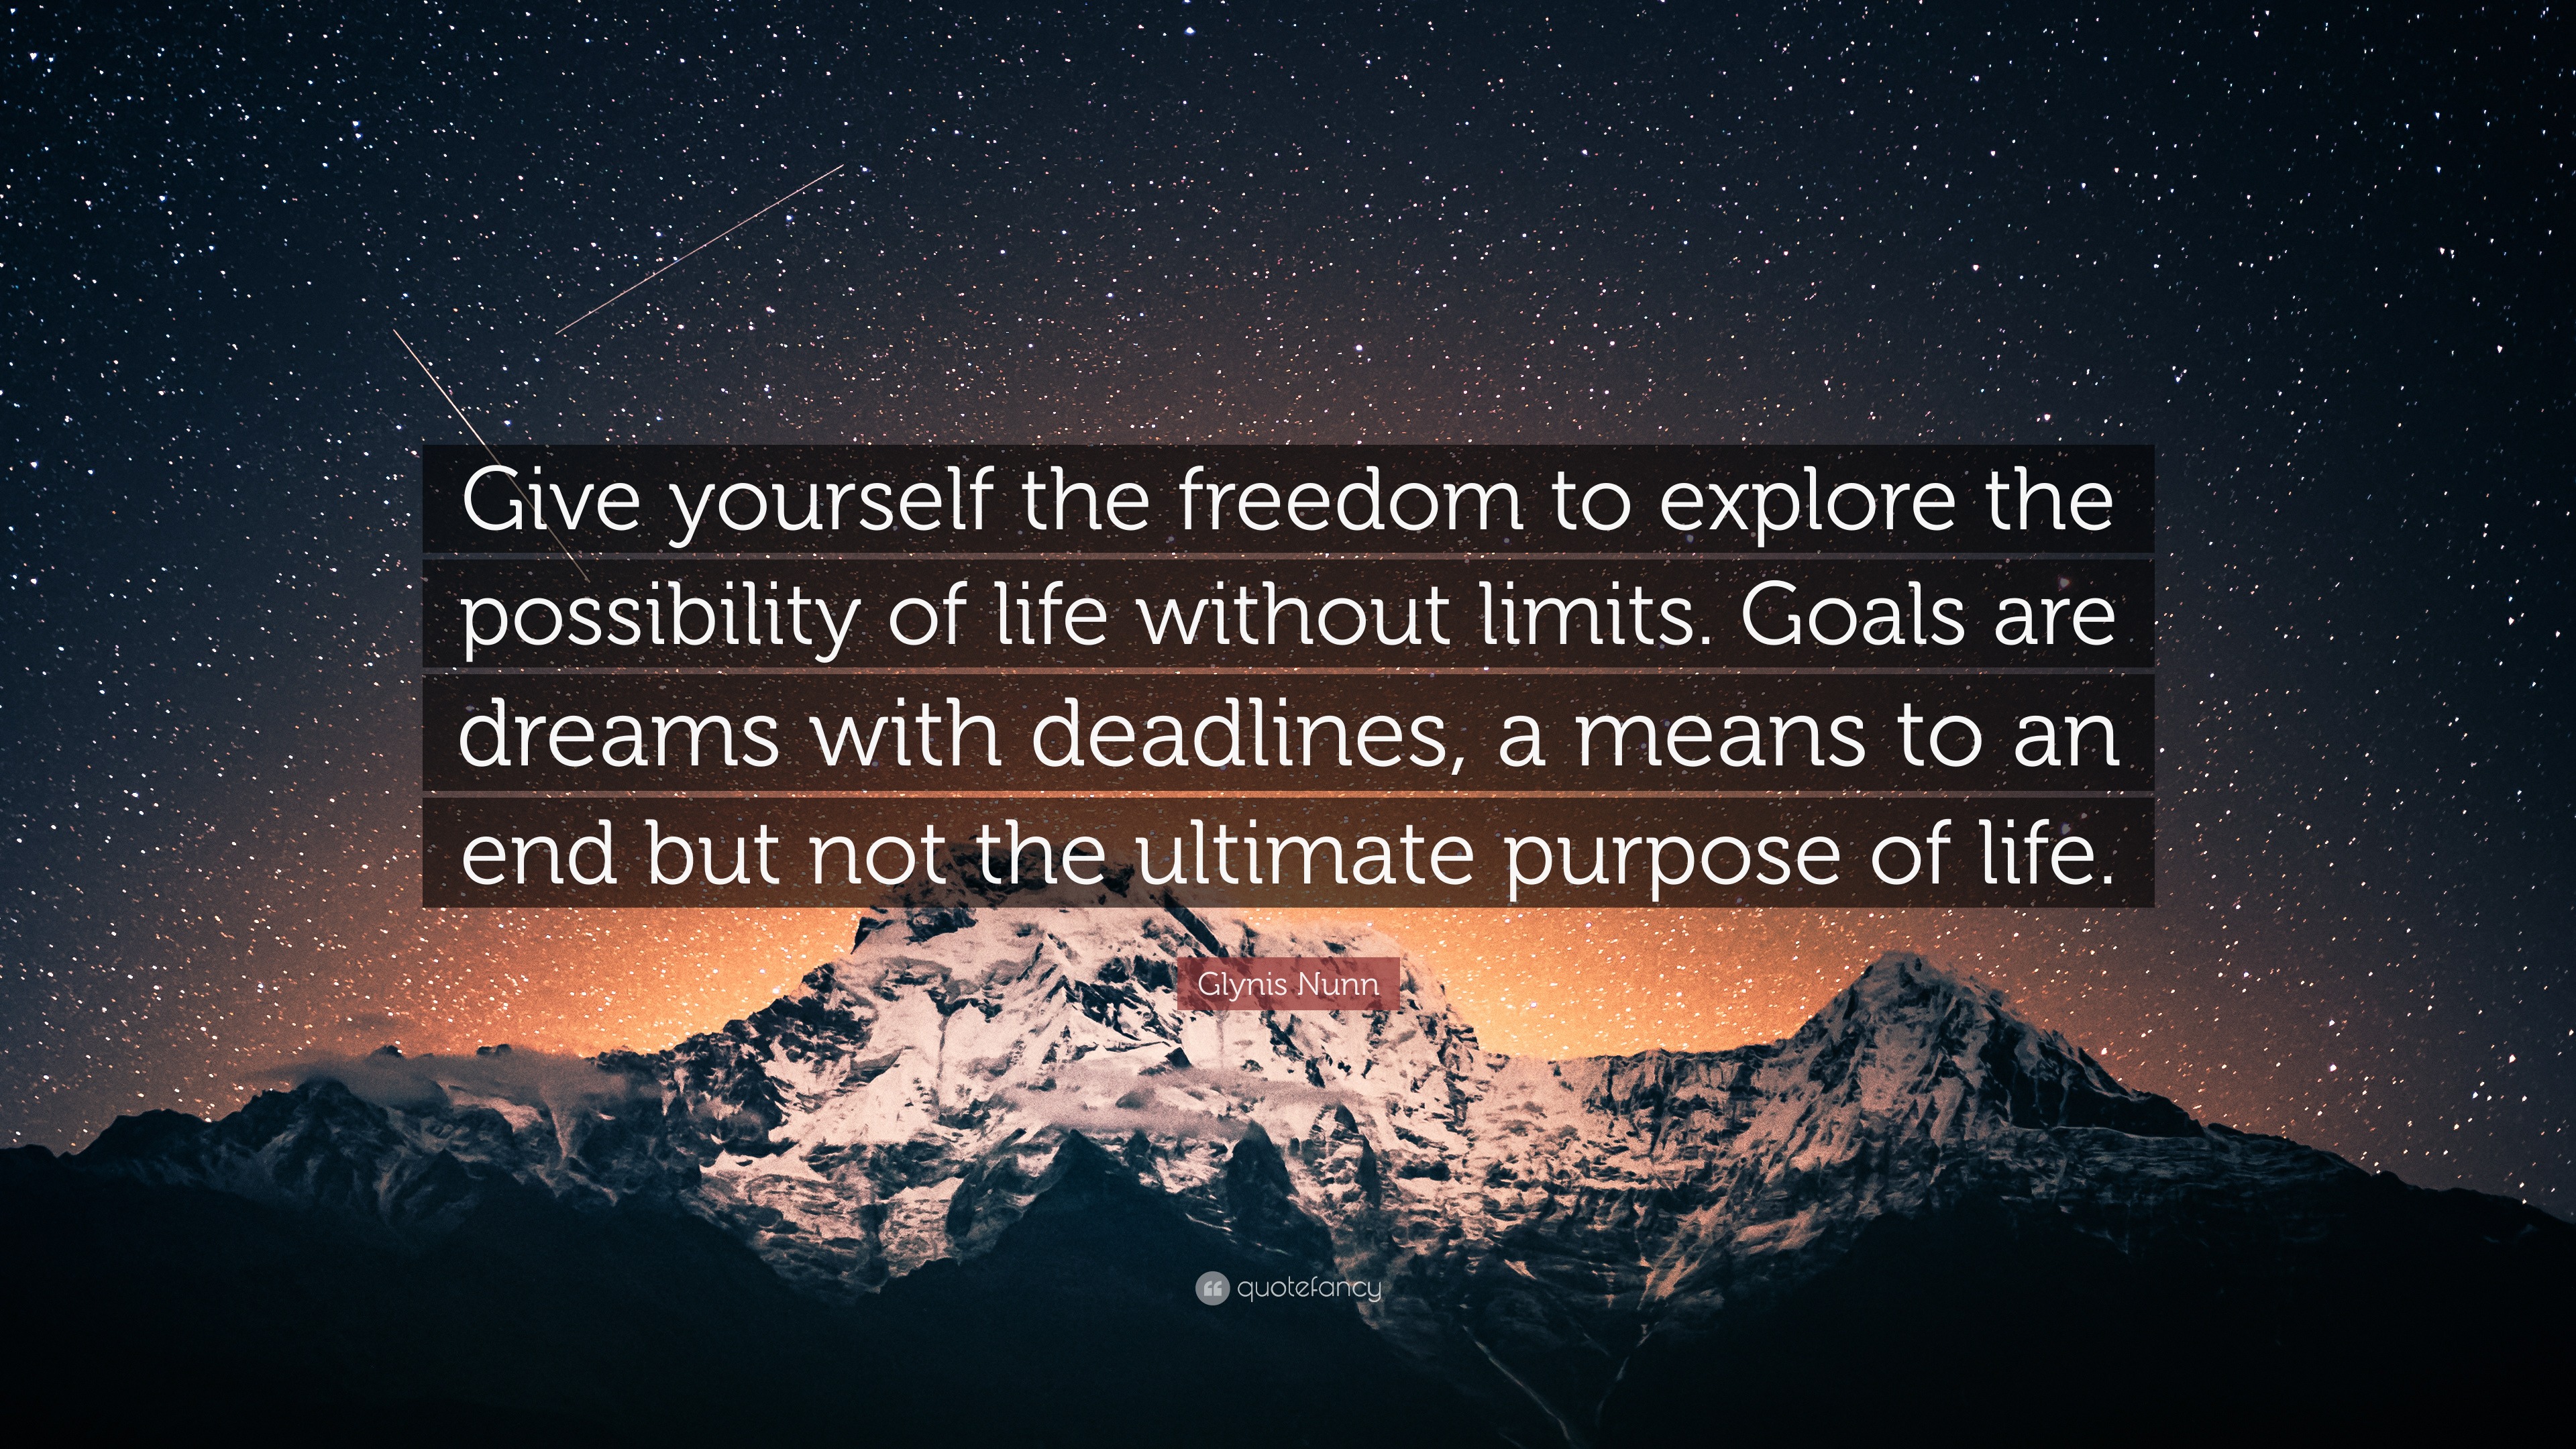 Glynis Nunn Quote “Give yourself the freedom to explore the possibility of life without